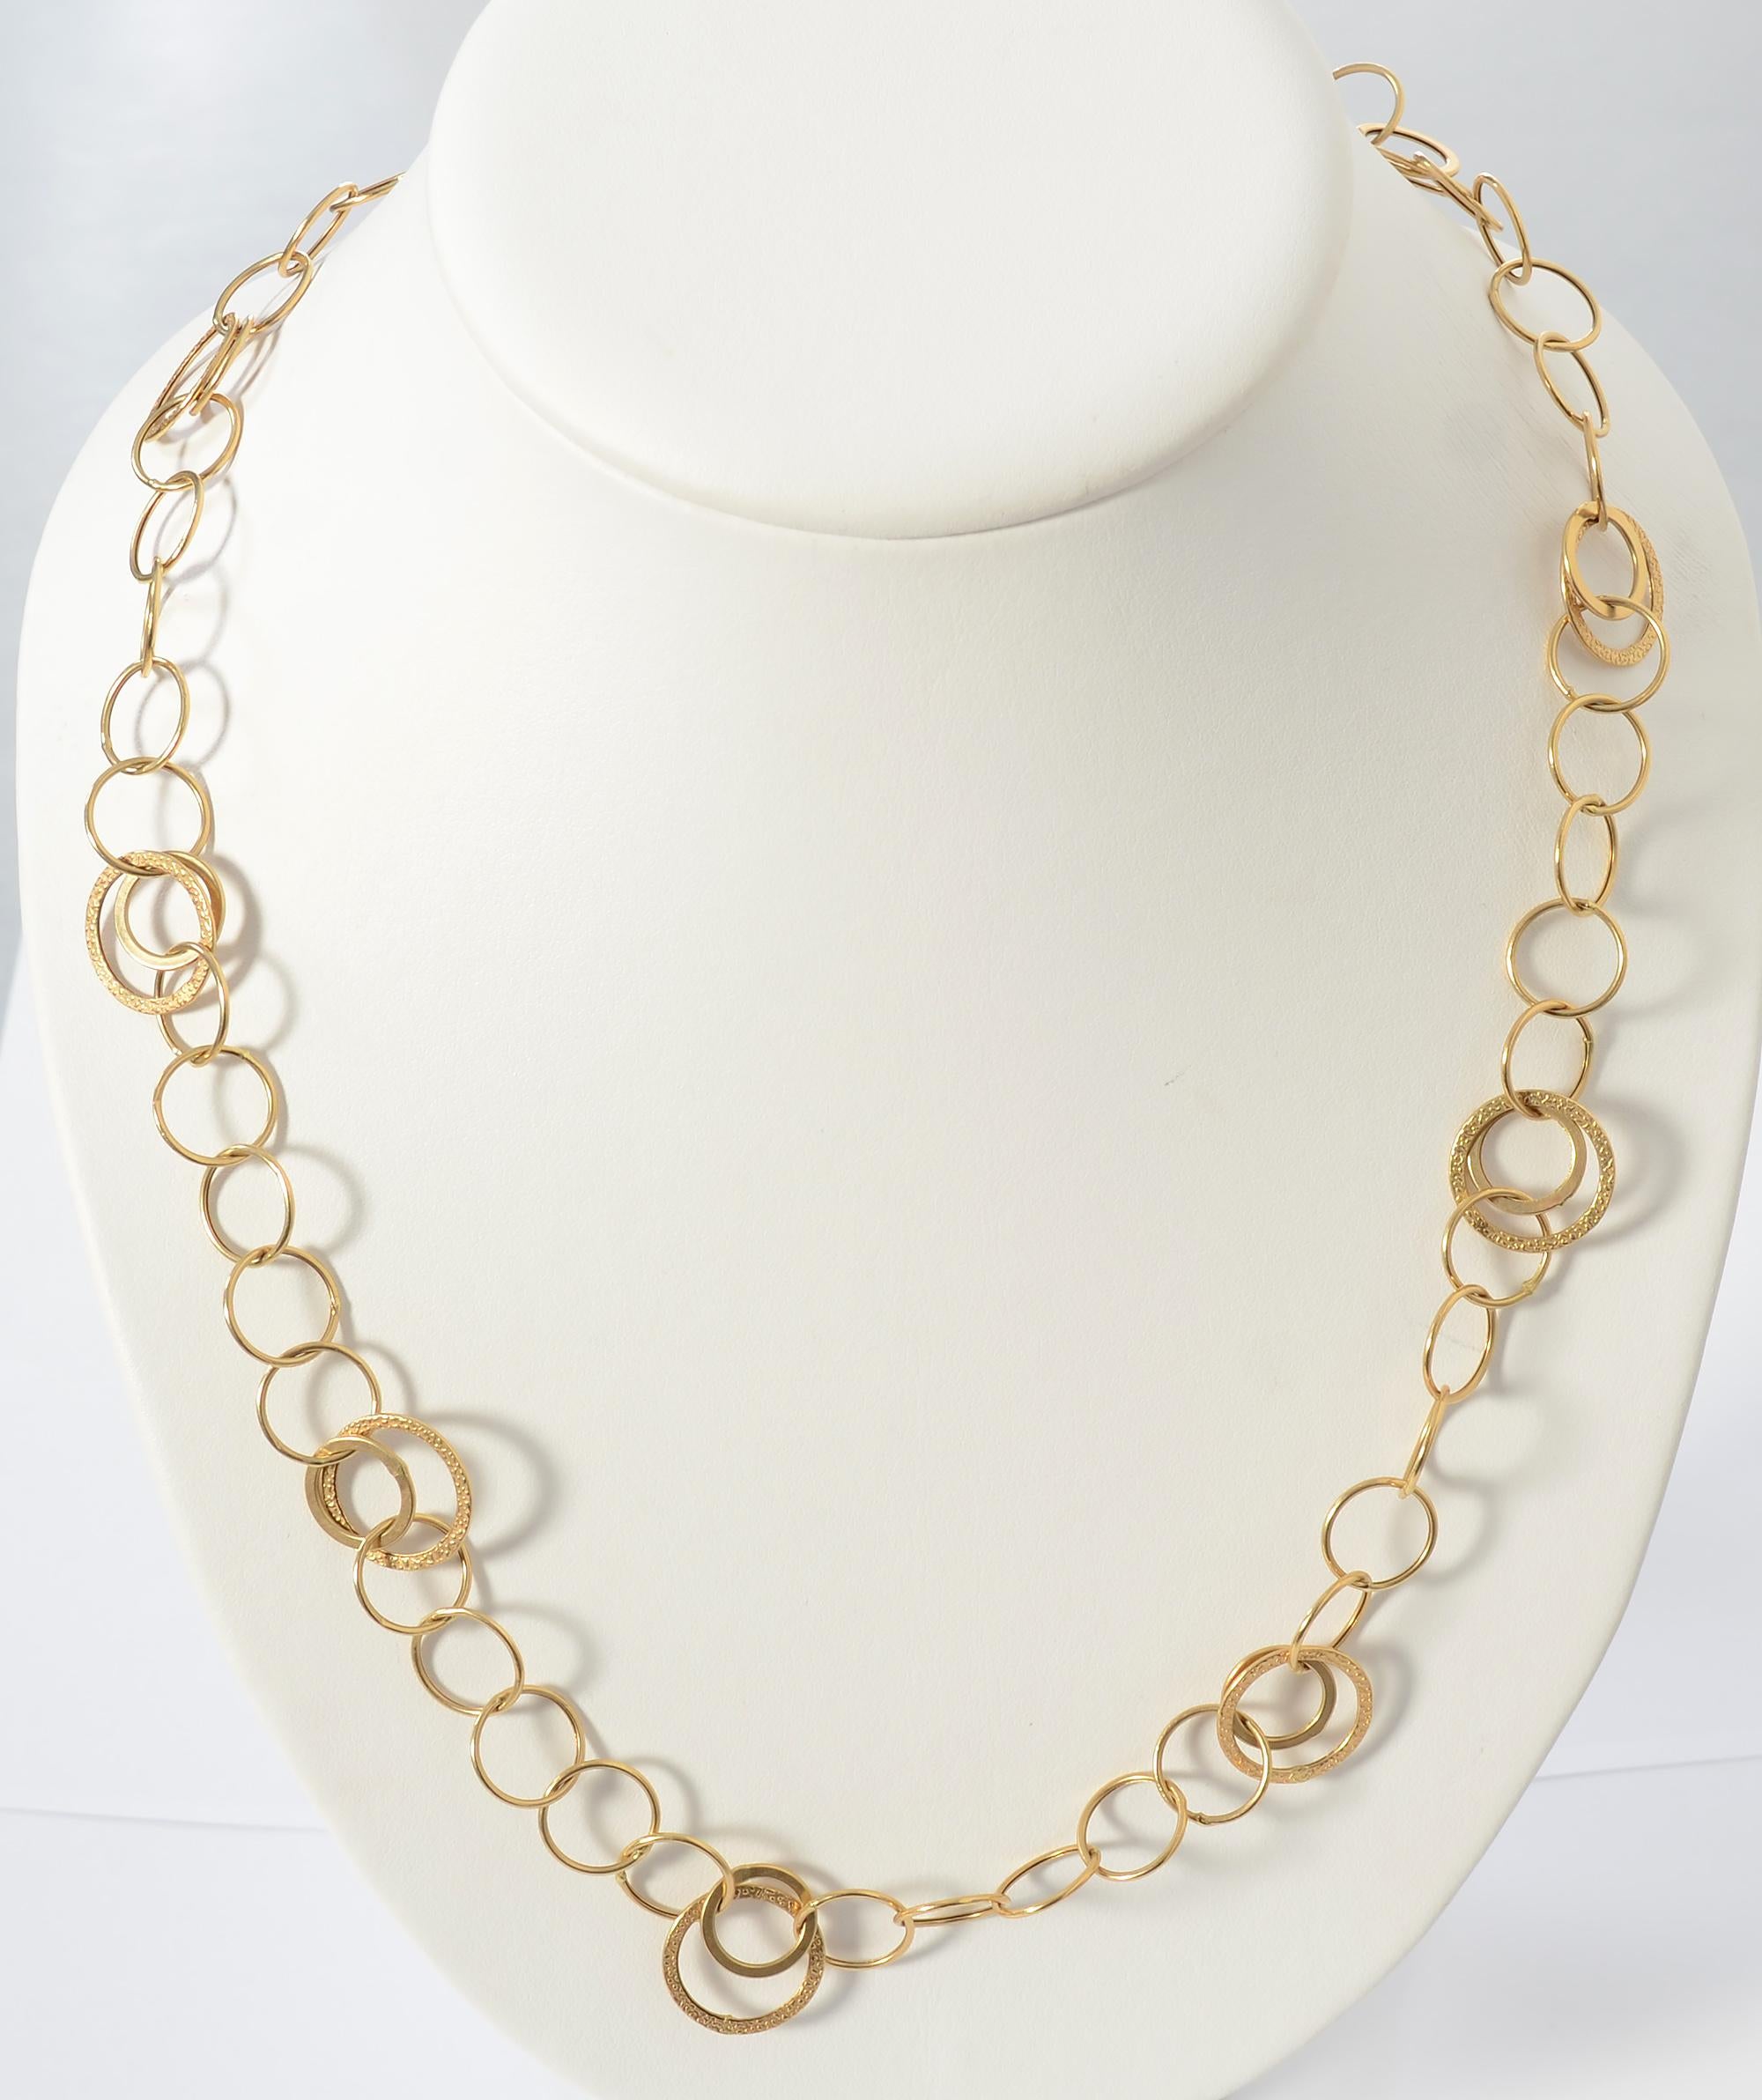 Wonderfully sporty long gold chain necklace with three different size circles. Two of the sizes have a gloss finish and the largest has a raised texture. The largest circles are 5/8 